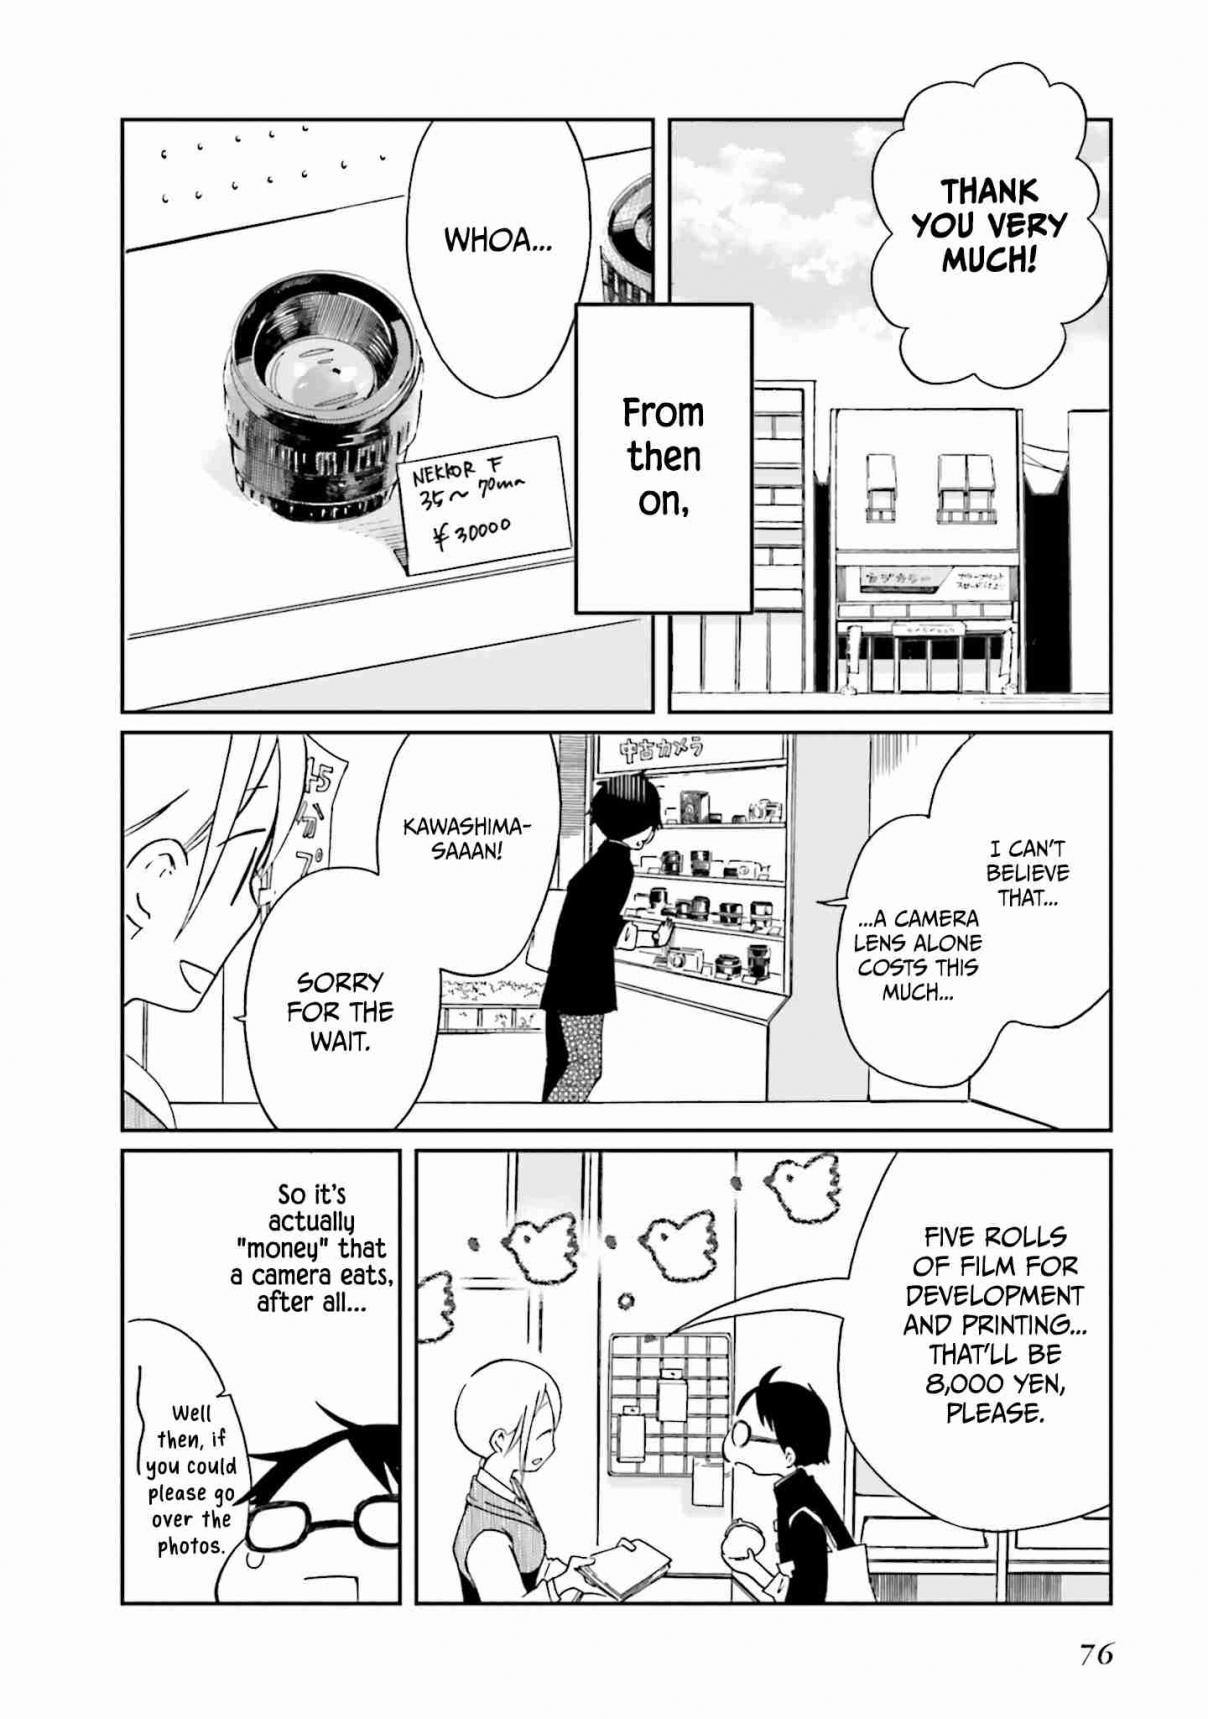 How to Capture Love Vol. 1 Ch. 3